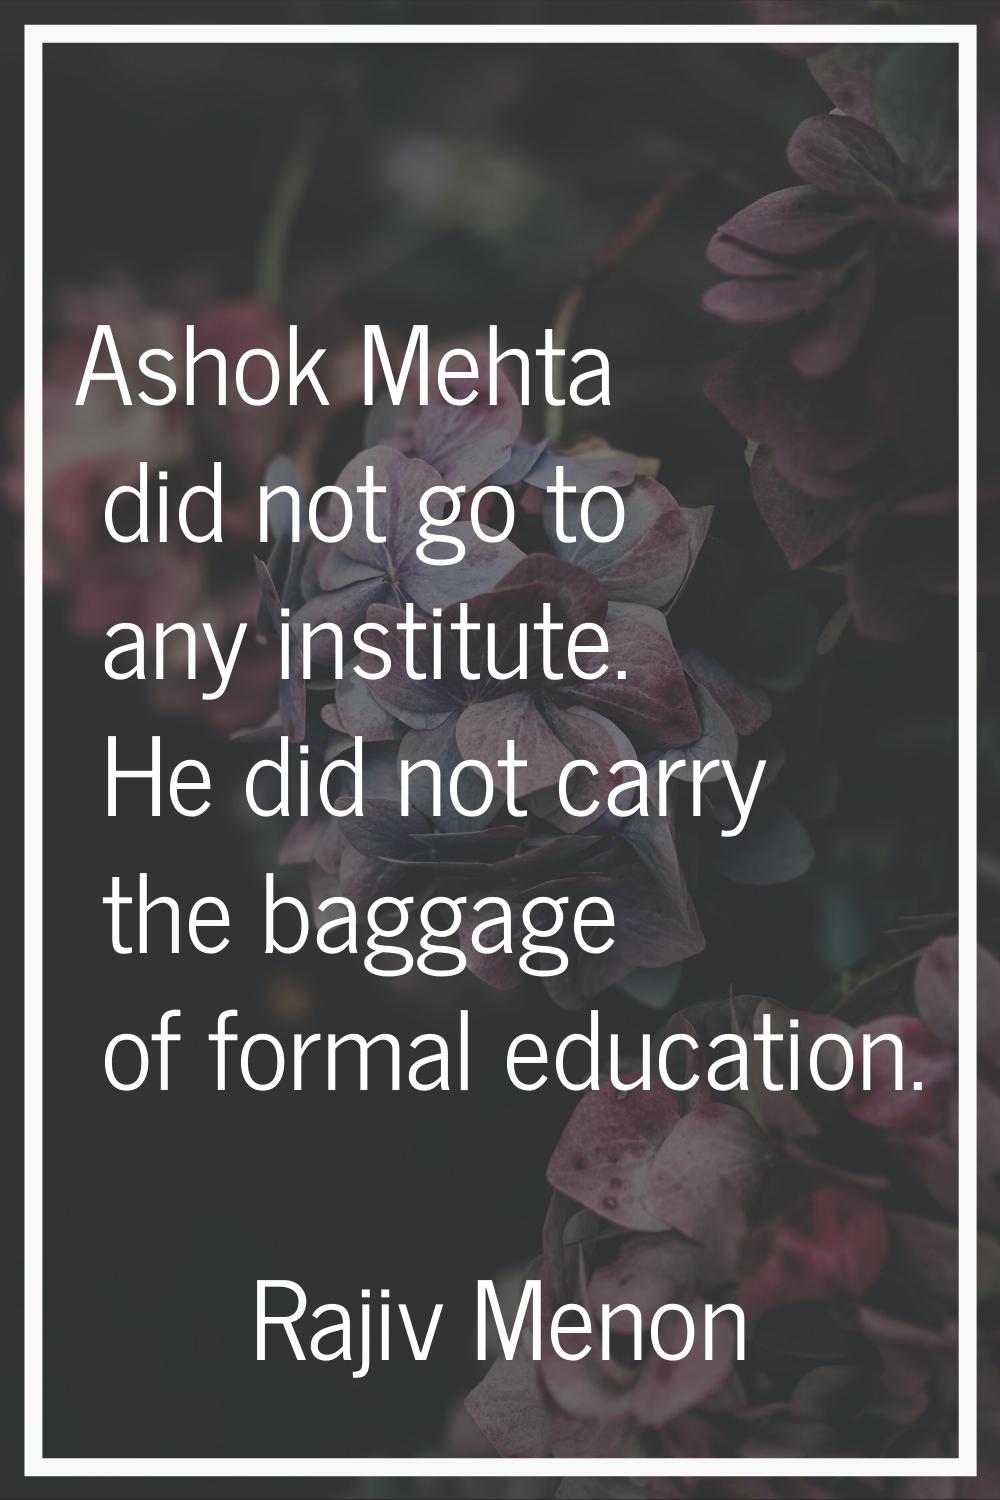 Ashok Mehta did not go to any institute. He did not carry the baggage of formal education.